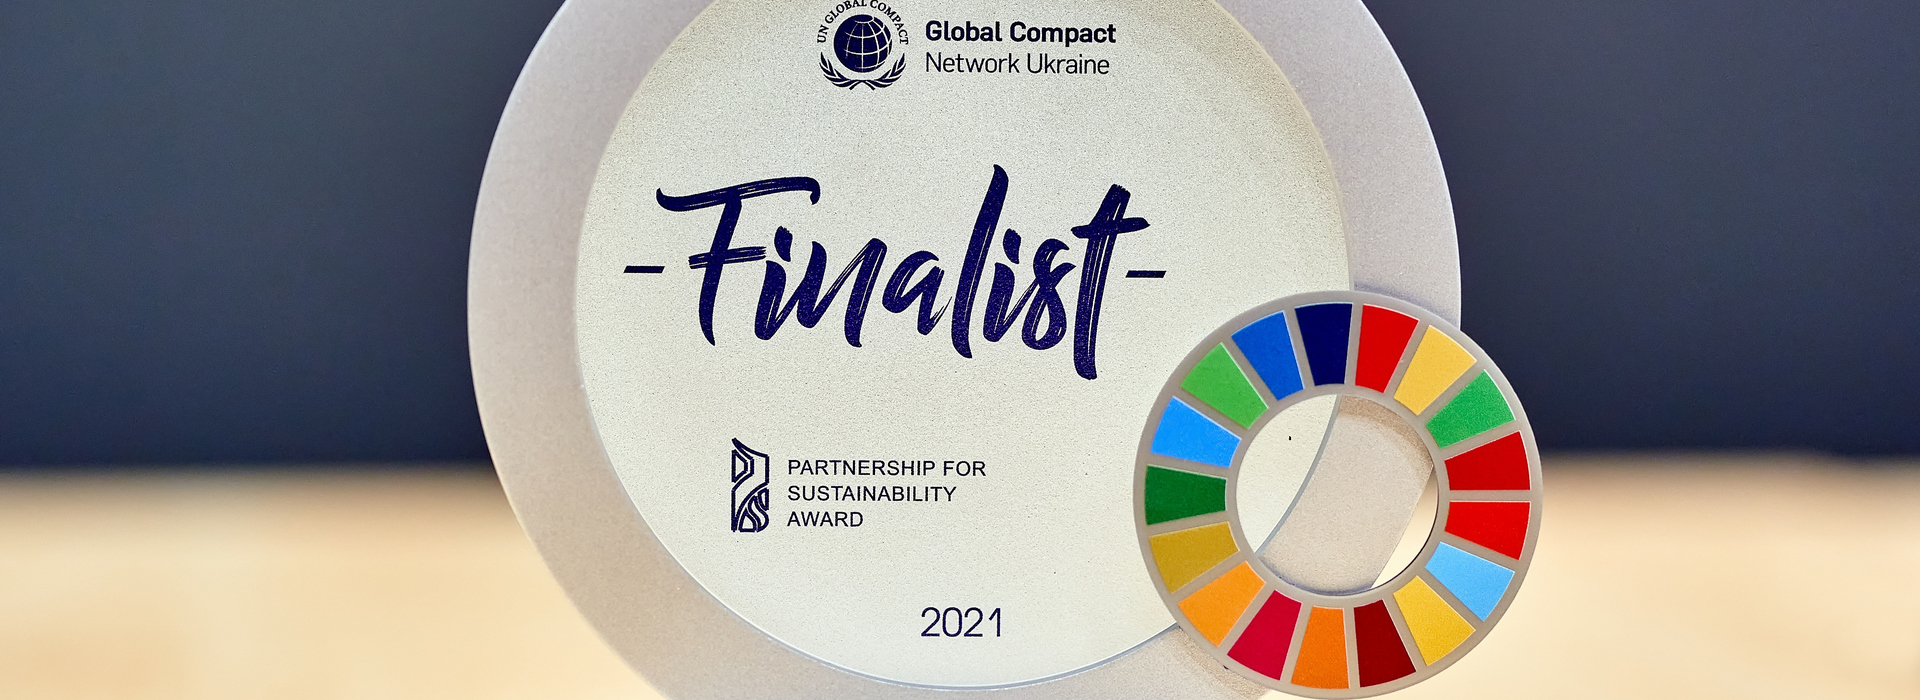 Carlsberg Ukraine Became a Finalist in the Partnership for Sustainability Award 2021 for a Joint Project with AB InBev Efes Ukraine